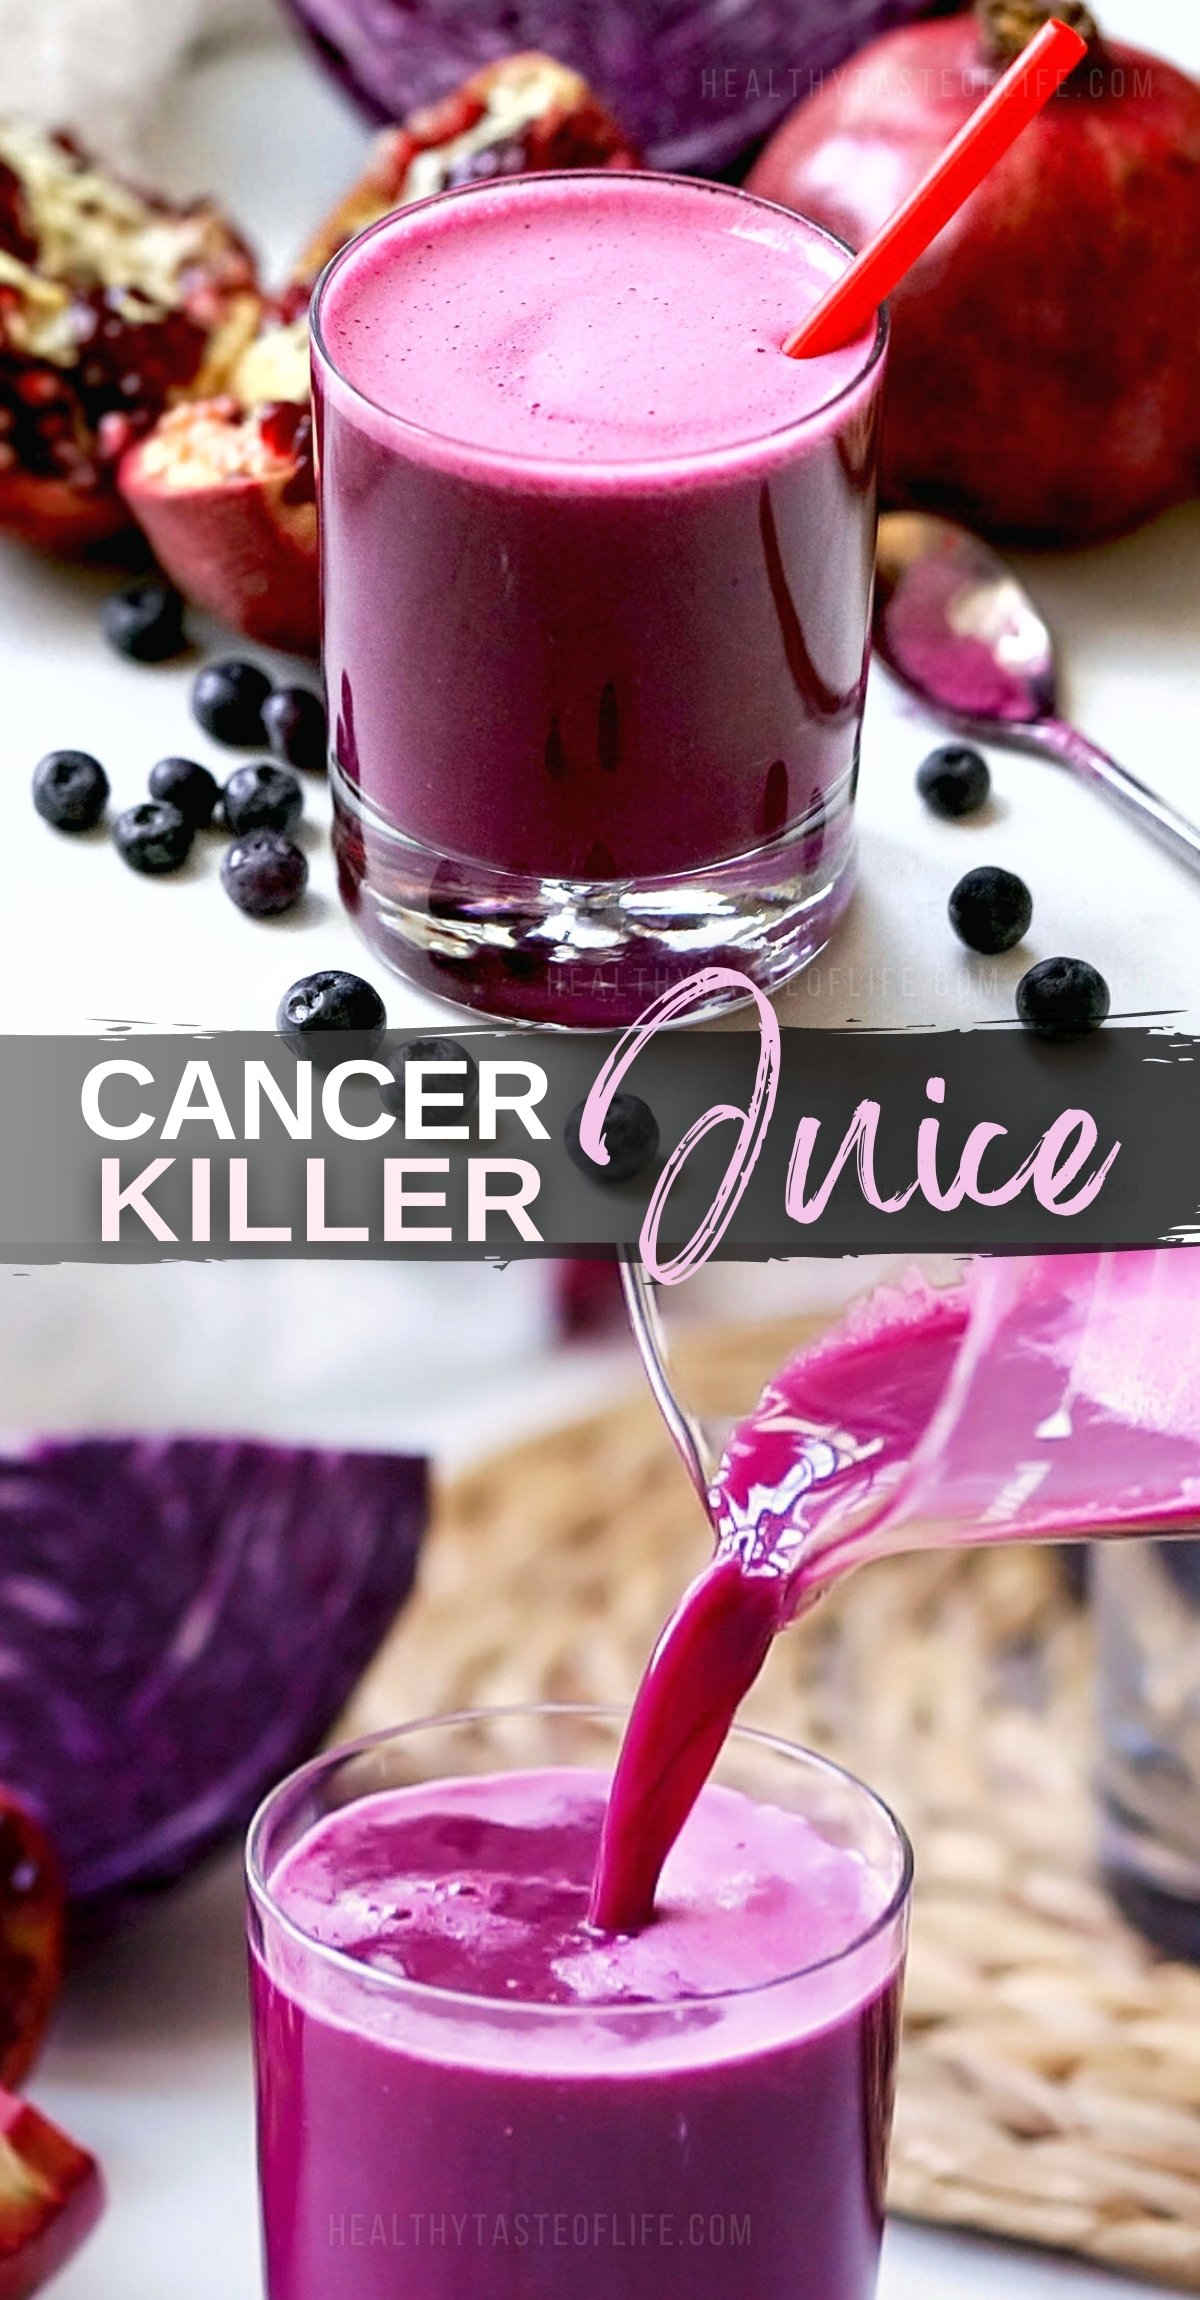 A potent juice recipe for your health with anti-cancer properties. The ingredients of this cancer killer juice are extra rich in antioxidant and anti-inflammatory nutrients and vitamins. The best cancer fighting juice you can make to improve your health along other treatments. #anticancer #cancer #juice #recipe #cancerkiller #health